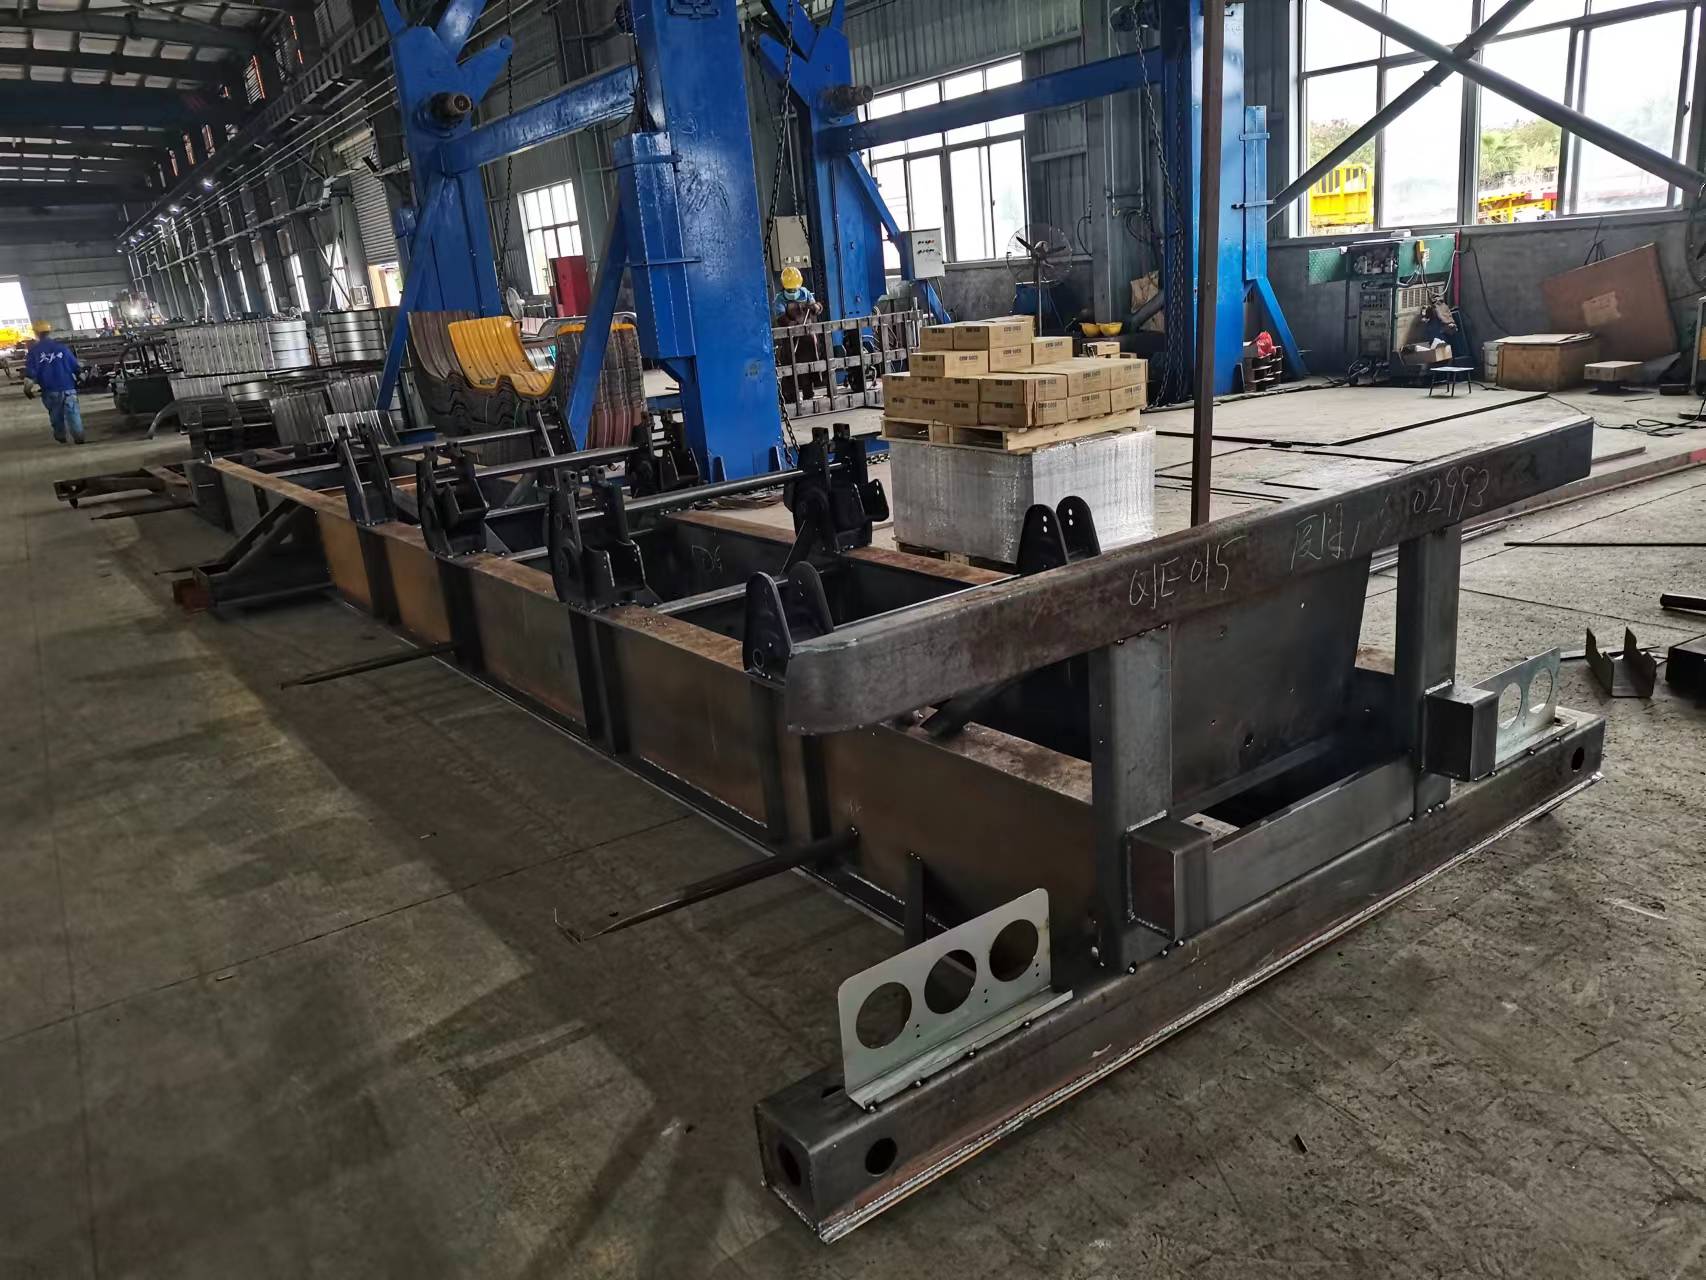 40ft container chassis is under fabrication